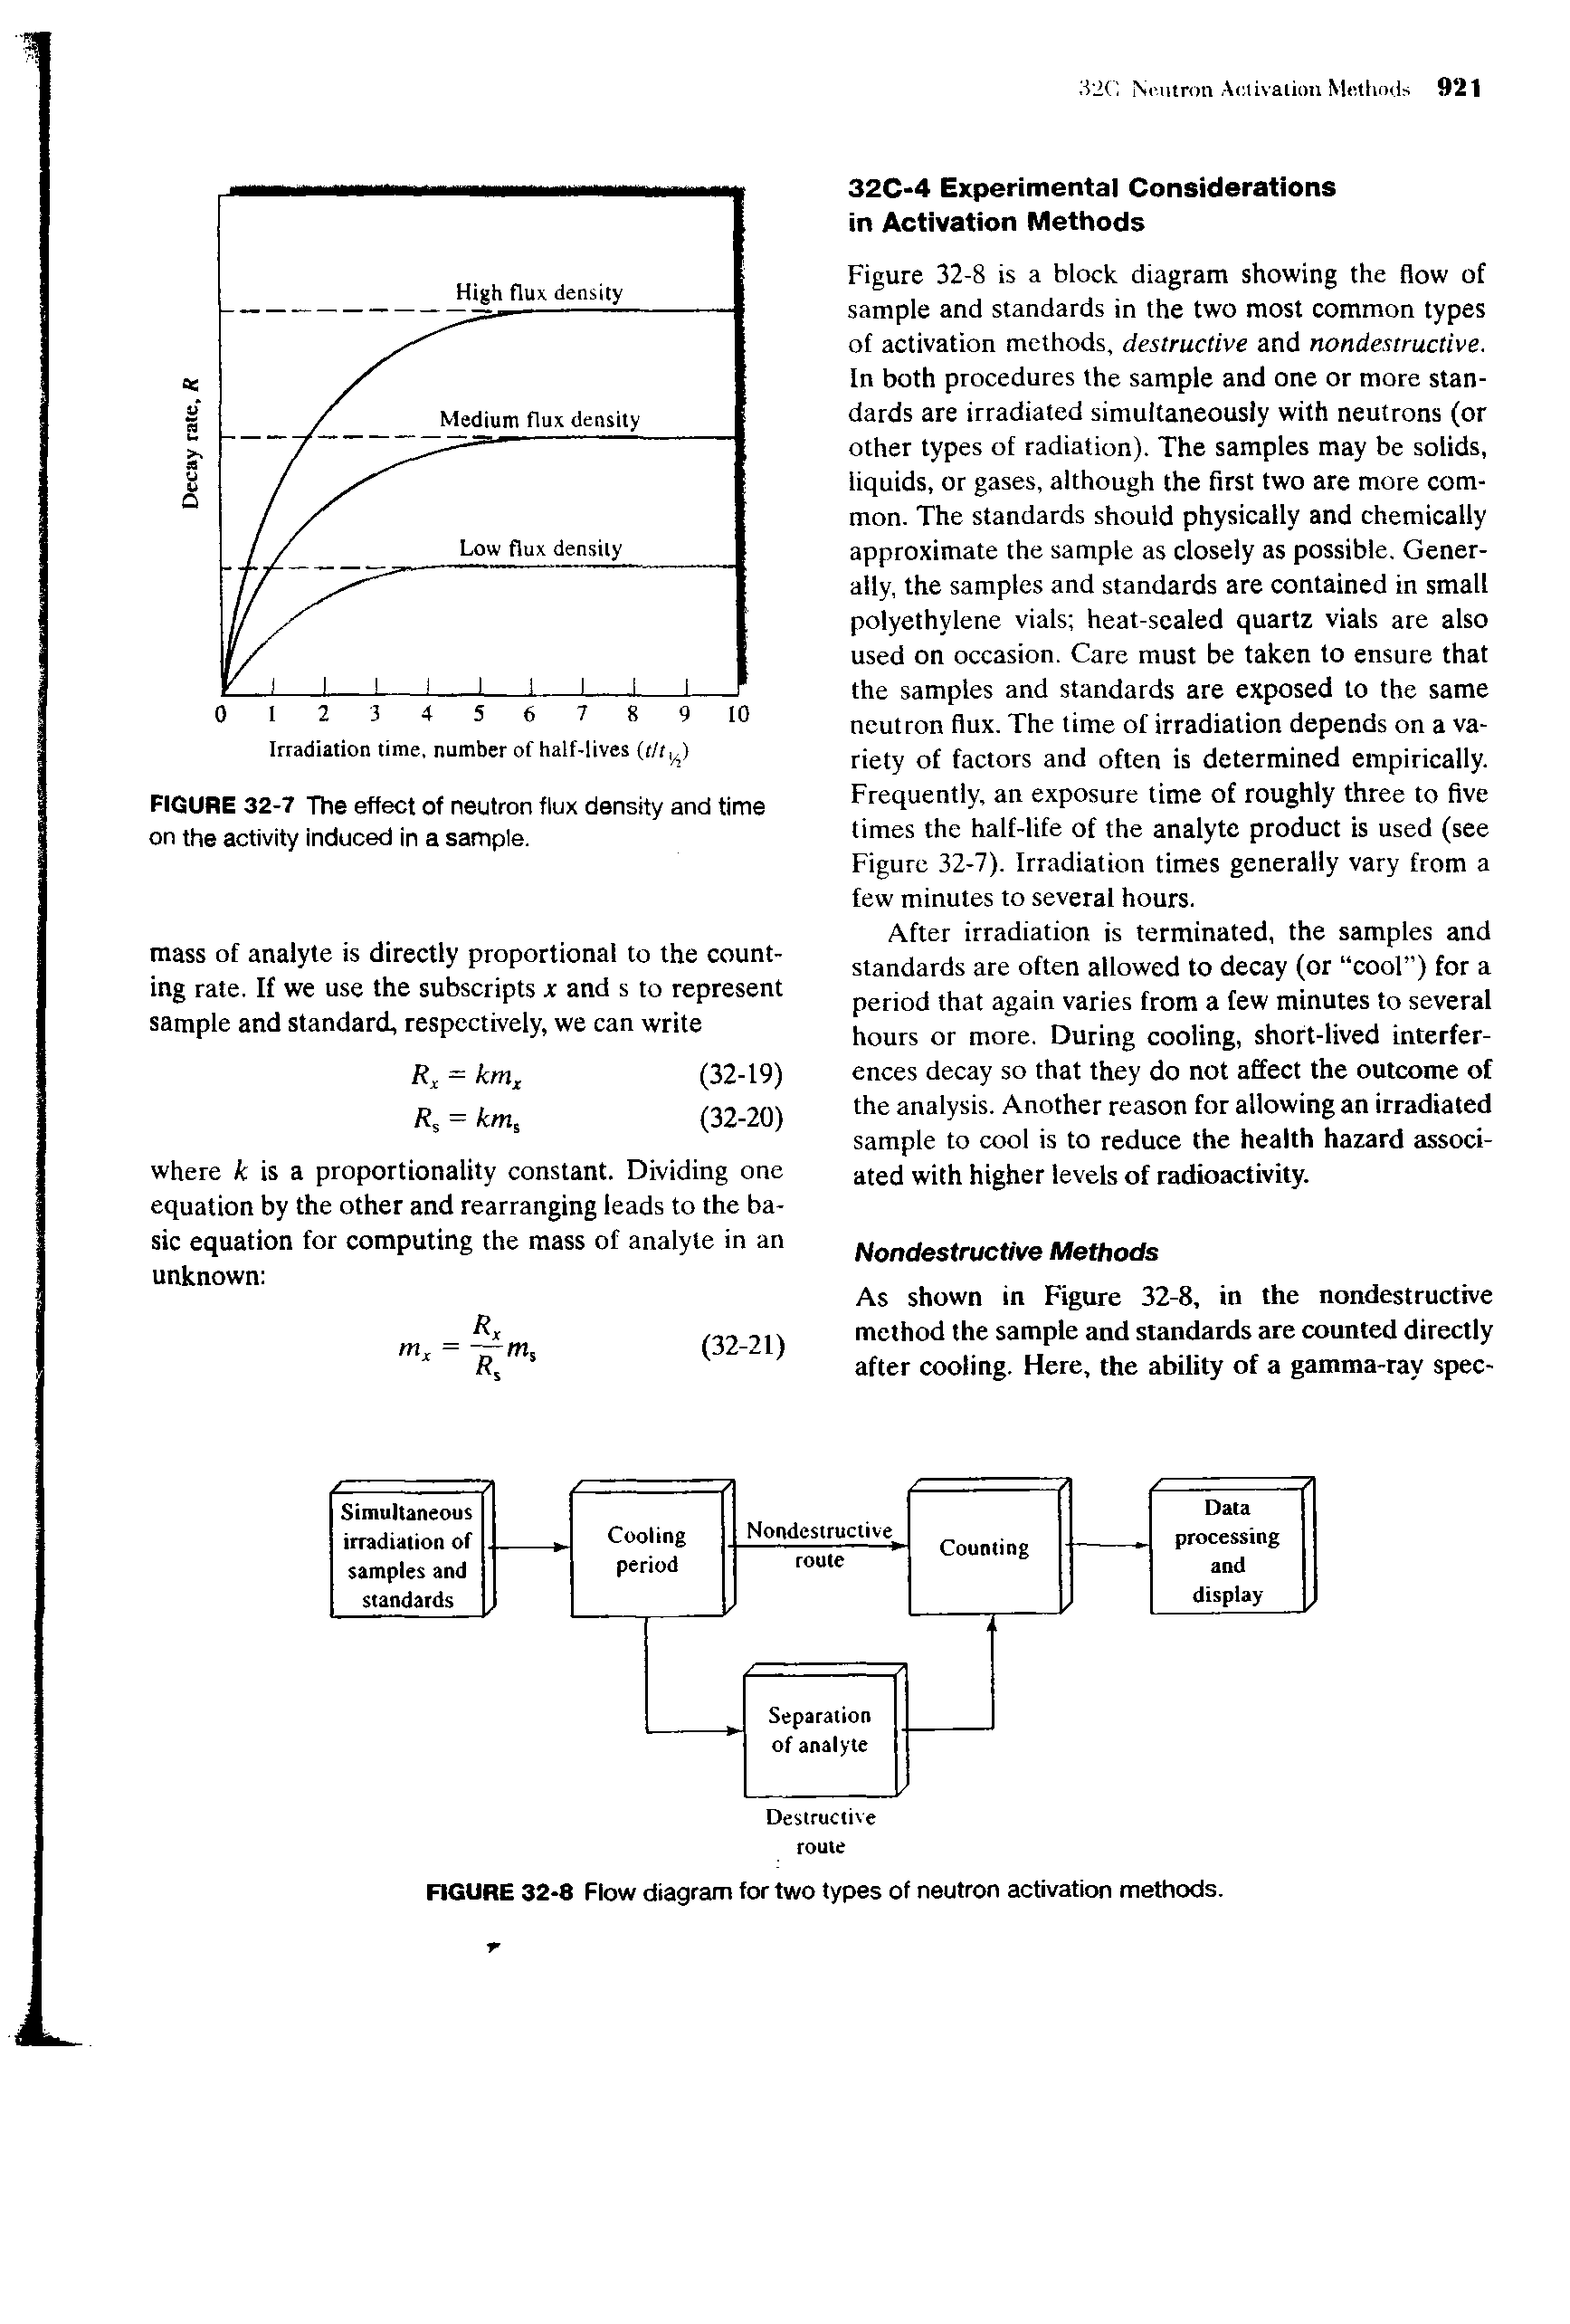 Figure 32-8 is a block diagram showing the flow of sample and standards in the two most common types of activation methods, destructive and nondestructive. In both procedures the sample and one or more standards are irradiated simultaneously with neutrons (or other types of radiation). The samples may be solids, liquids, or gases, although the first two are more common. The standards should physically and chemically approximate the sample as closely as possible. Generally, the samples and standards are contained in small polyethylene vials heat-scaled quartz vials are also used on occasion. Care must be taken to ensure that the samples and standards are exposed to the same neutron flux. The time of irradiation depends on a variety of factors and often is determined empirically. Frequently, an exposure time of roughly three to five times the half-life of the analyte product is used (see Figure 32-7). Irradiation times generally vary from a few minutes to several hours.